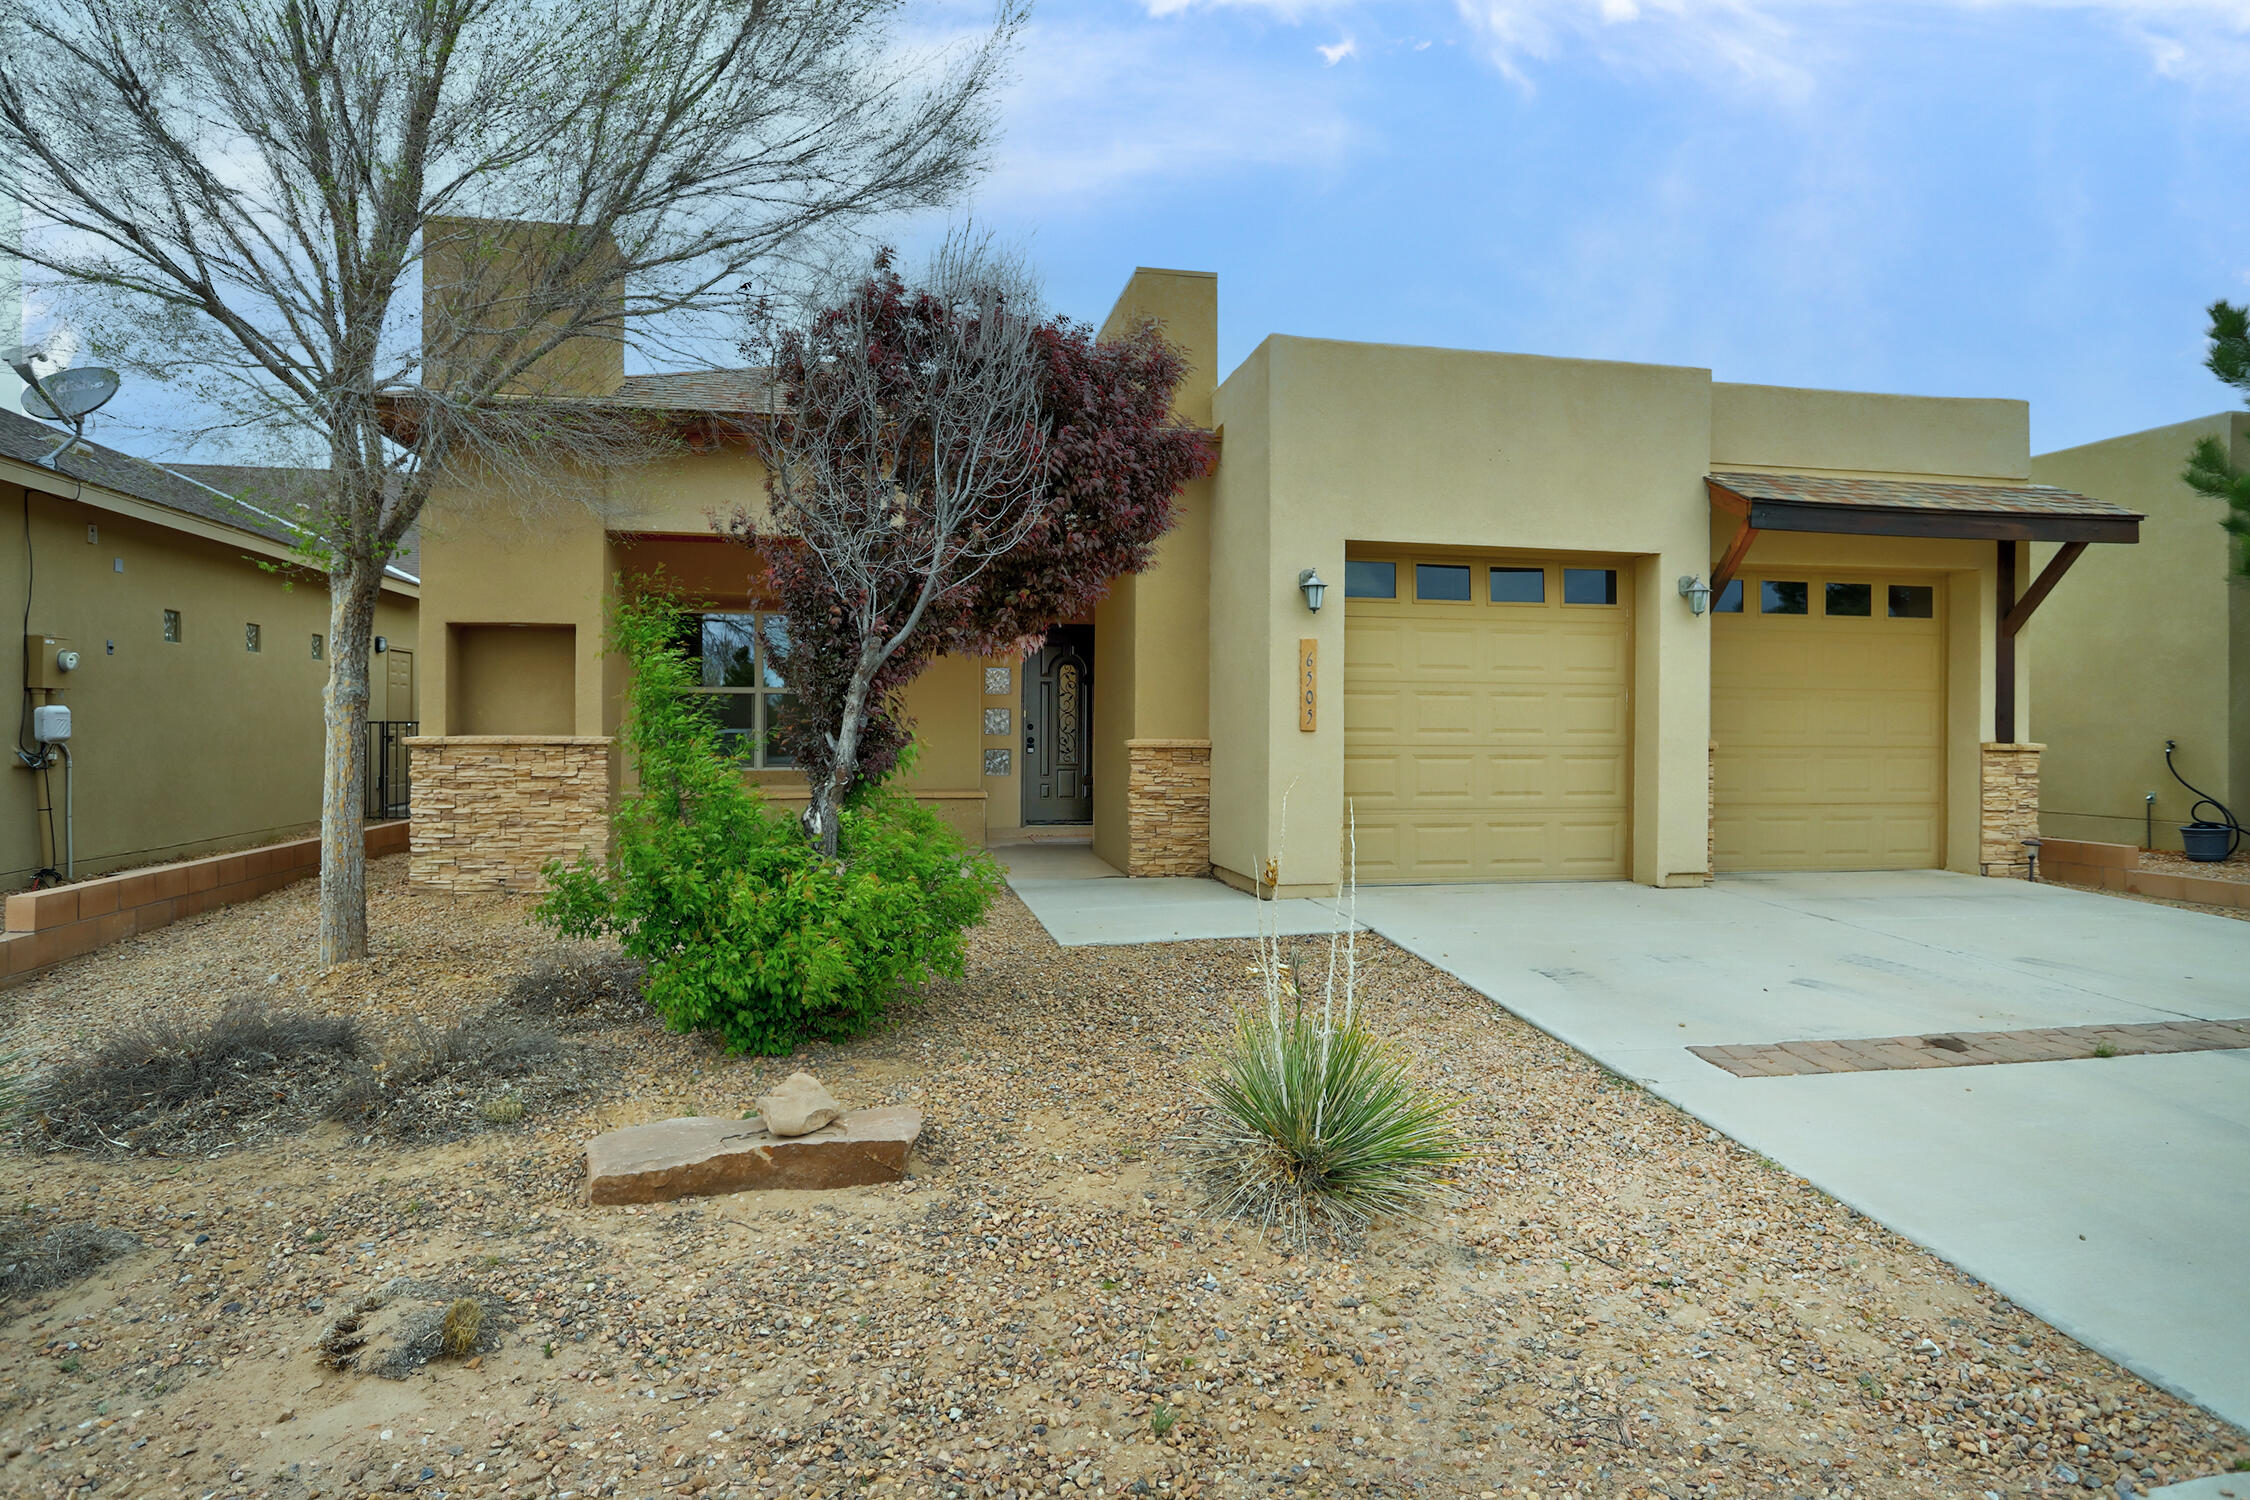 6505 Jazmin Place NW, Albuquerque, New Mexico 87114, 3 Bedrooms Bedrooms, ,2 BathroomsBathrooms,Residential,For Sale,6505 Jazmin Place NW,1061539